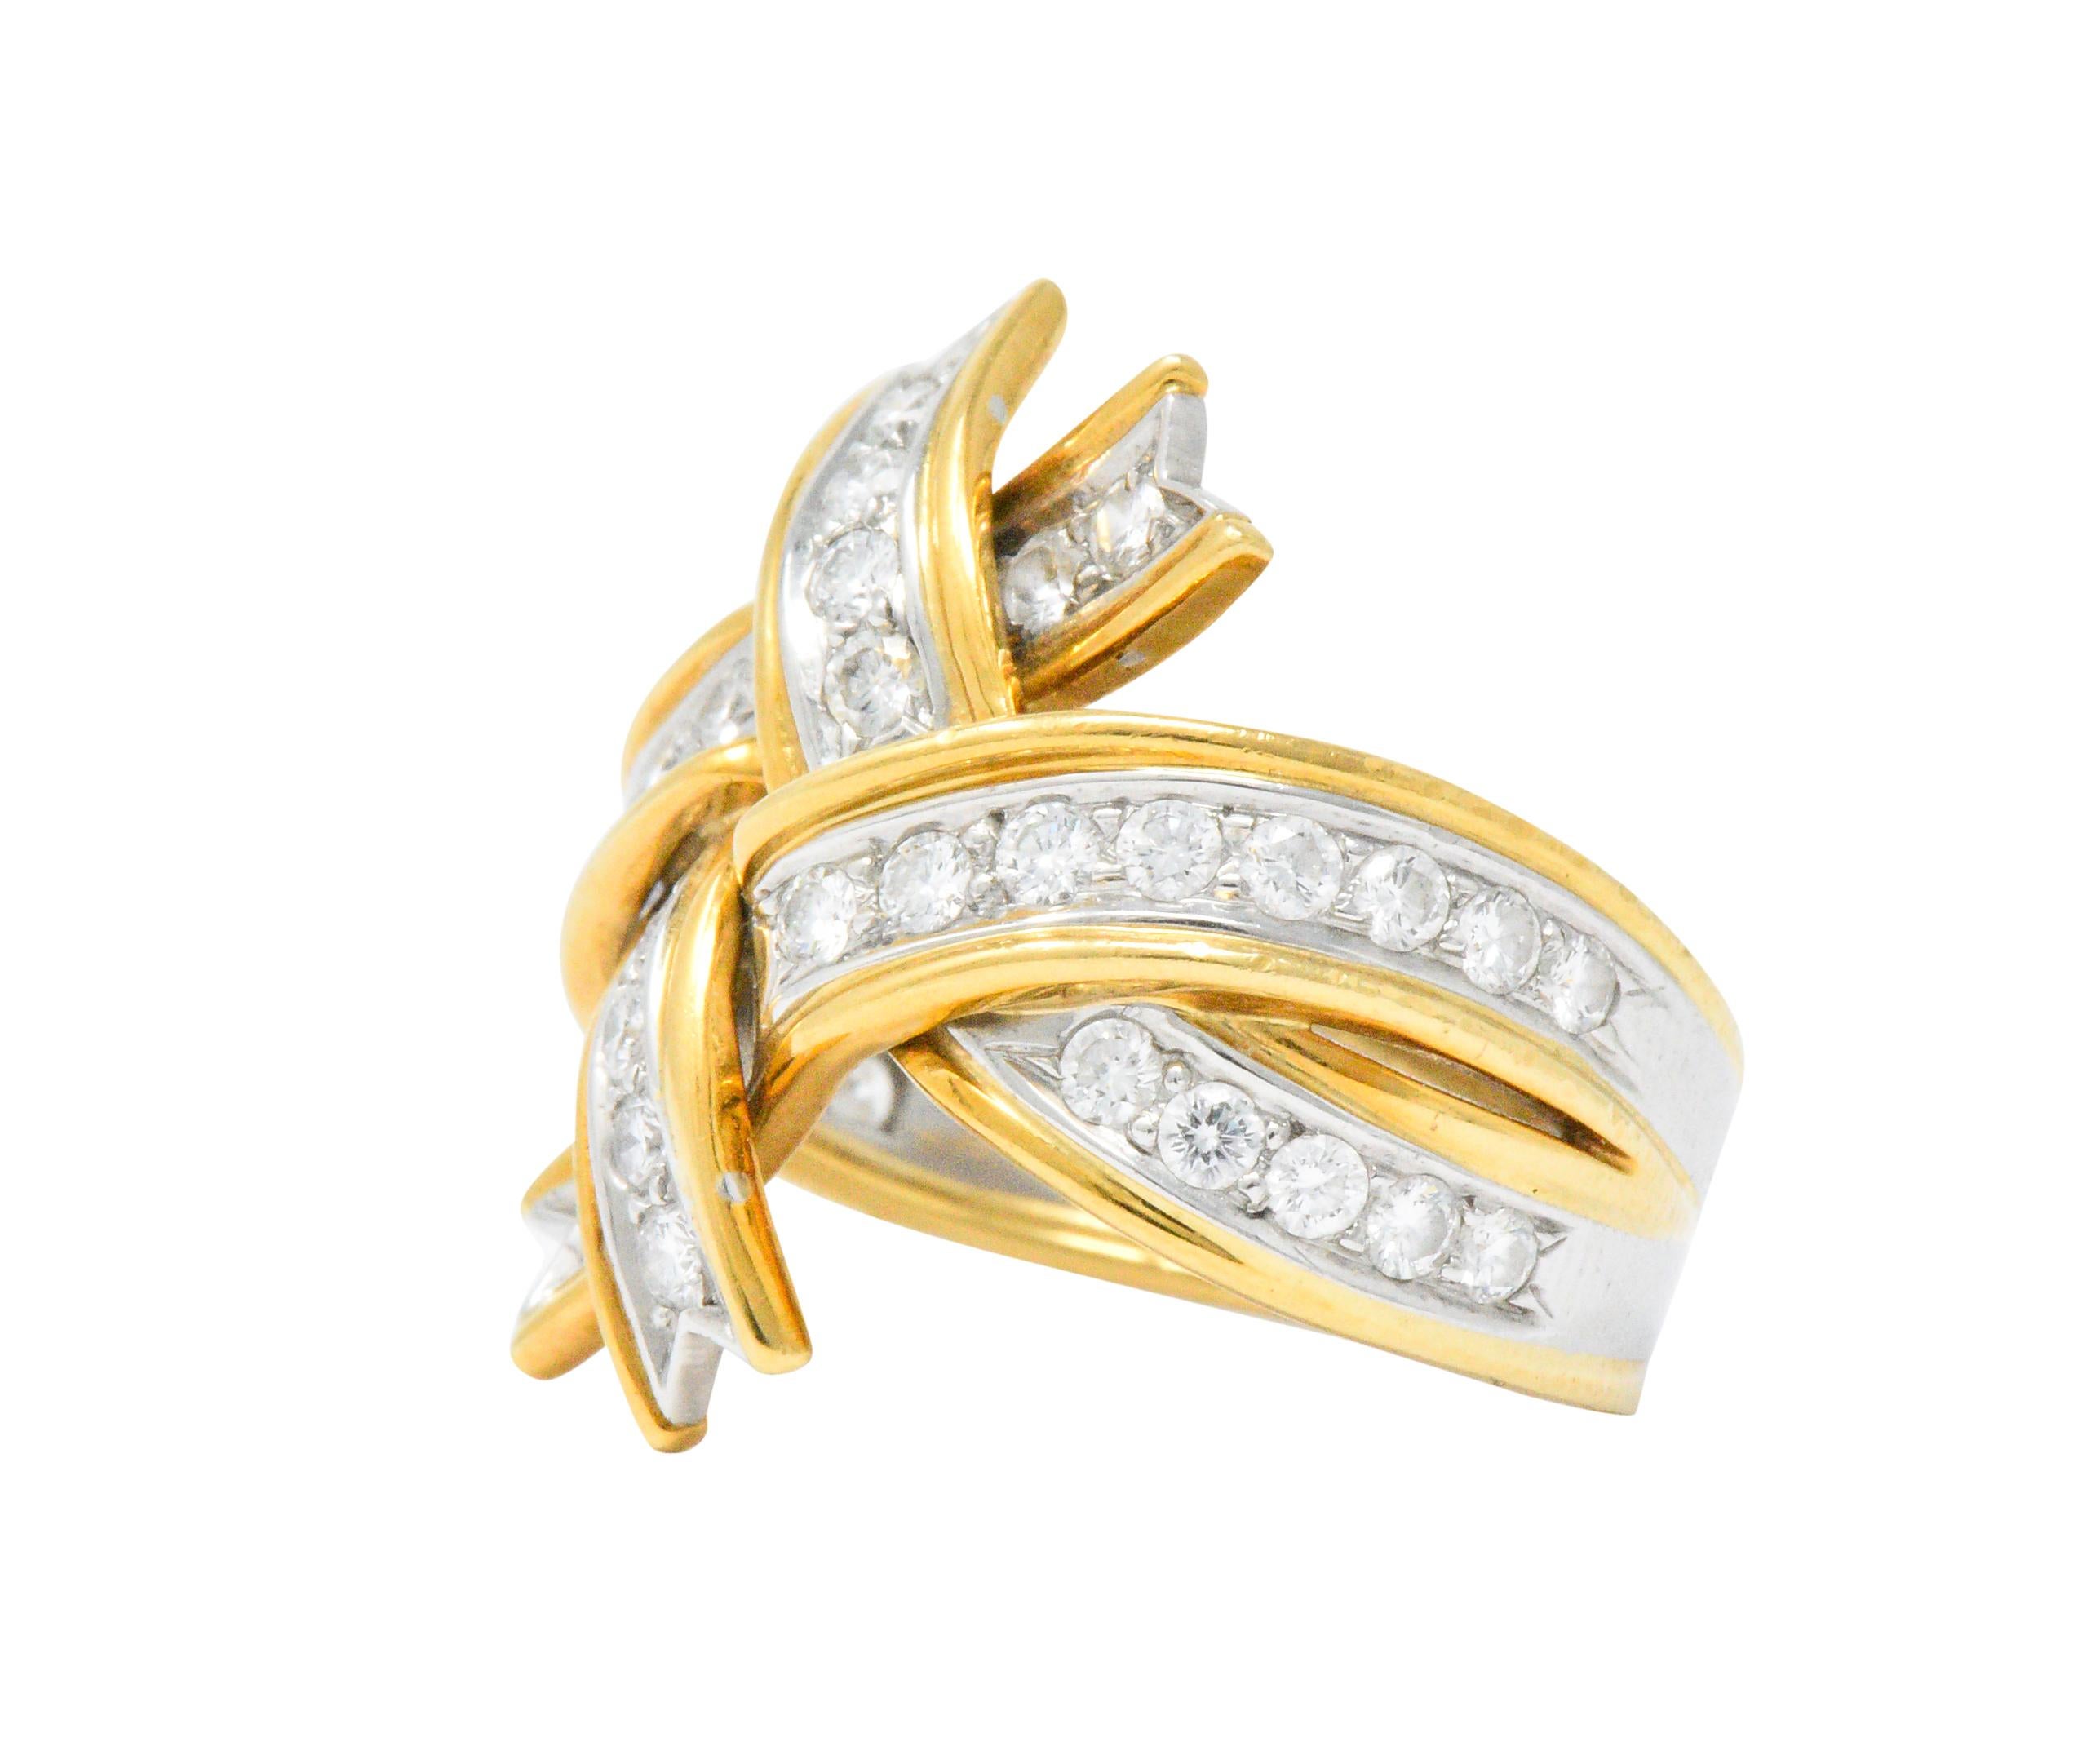 Intertwining and overlapping ribbons set with round brilliant cut diamonds, weighing approximately 1.14 carats, G/H color and VS clarity

Beautifully designed and detailed with appearance of flowing ribbons featuring dovetailed ends

Top measures